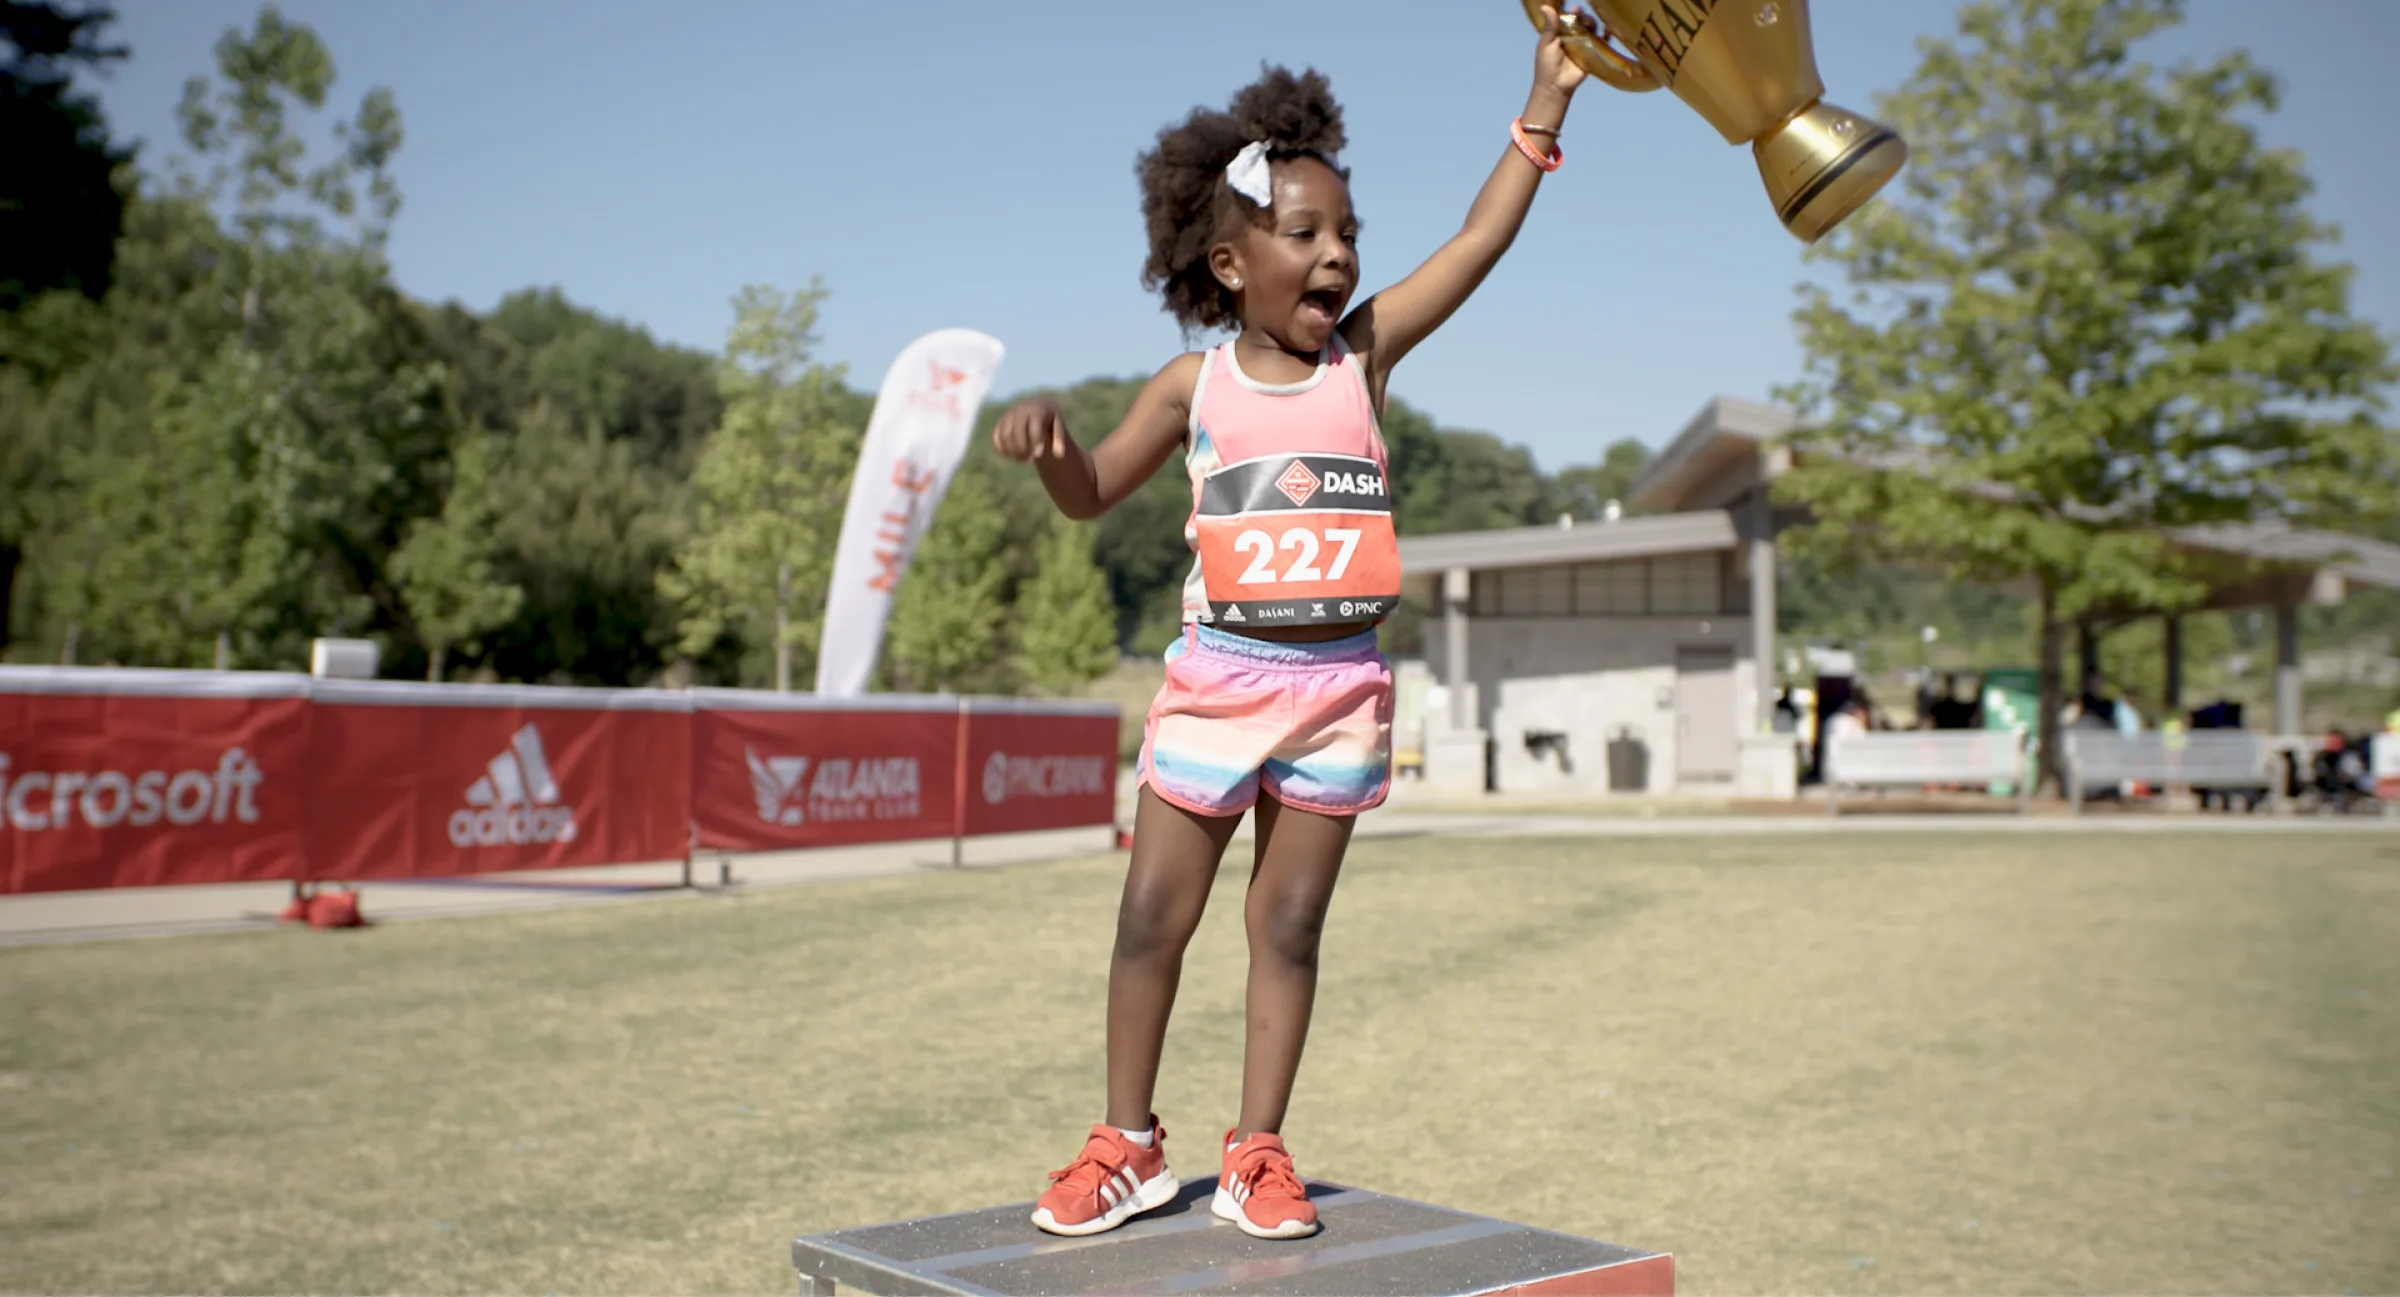 Young girl with running bib holding up a trophy on grass field.